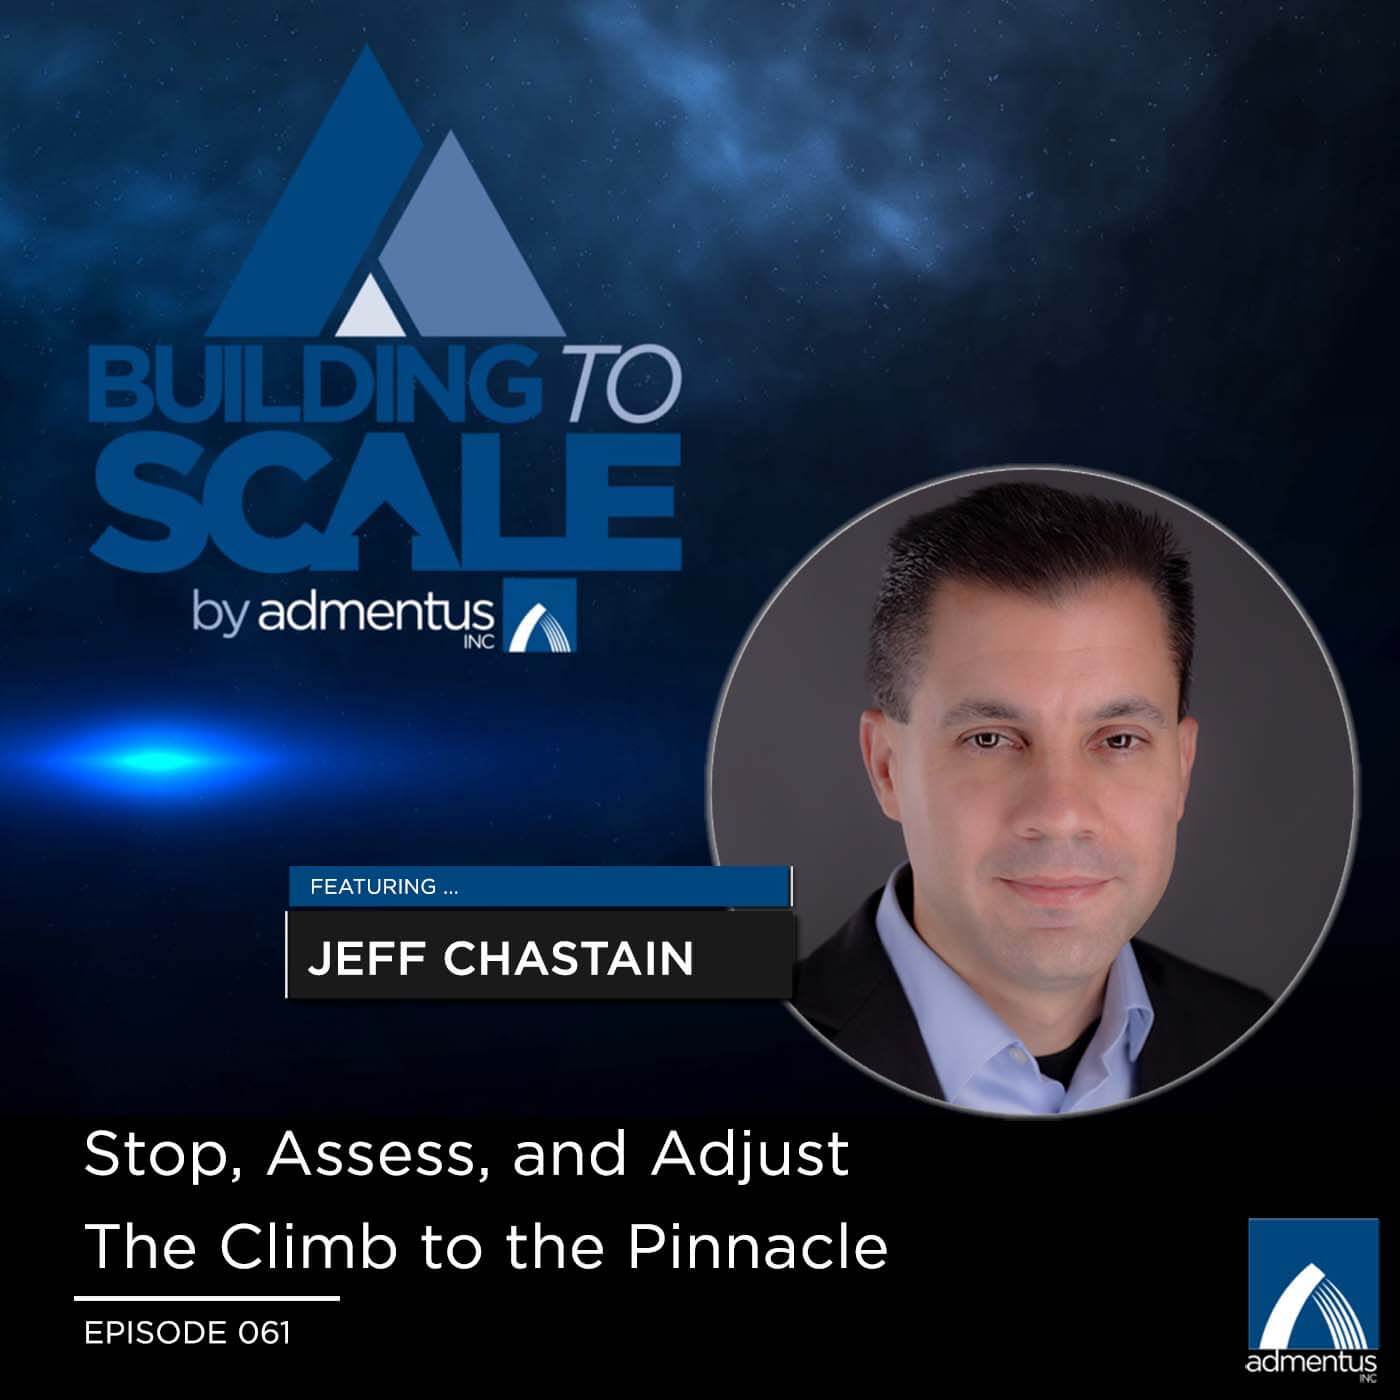 Stop, Assess, and Adjust – The Climb to the Pinnacle